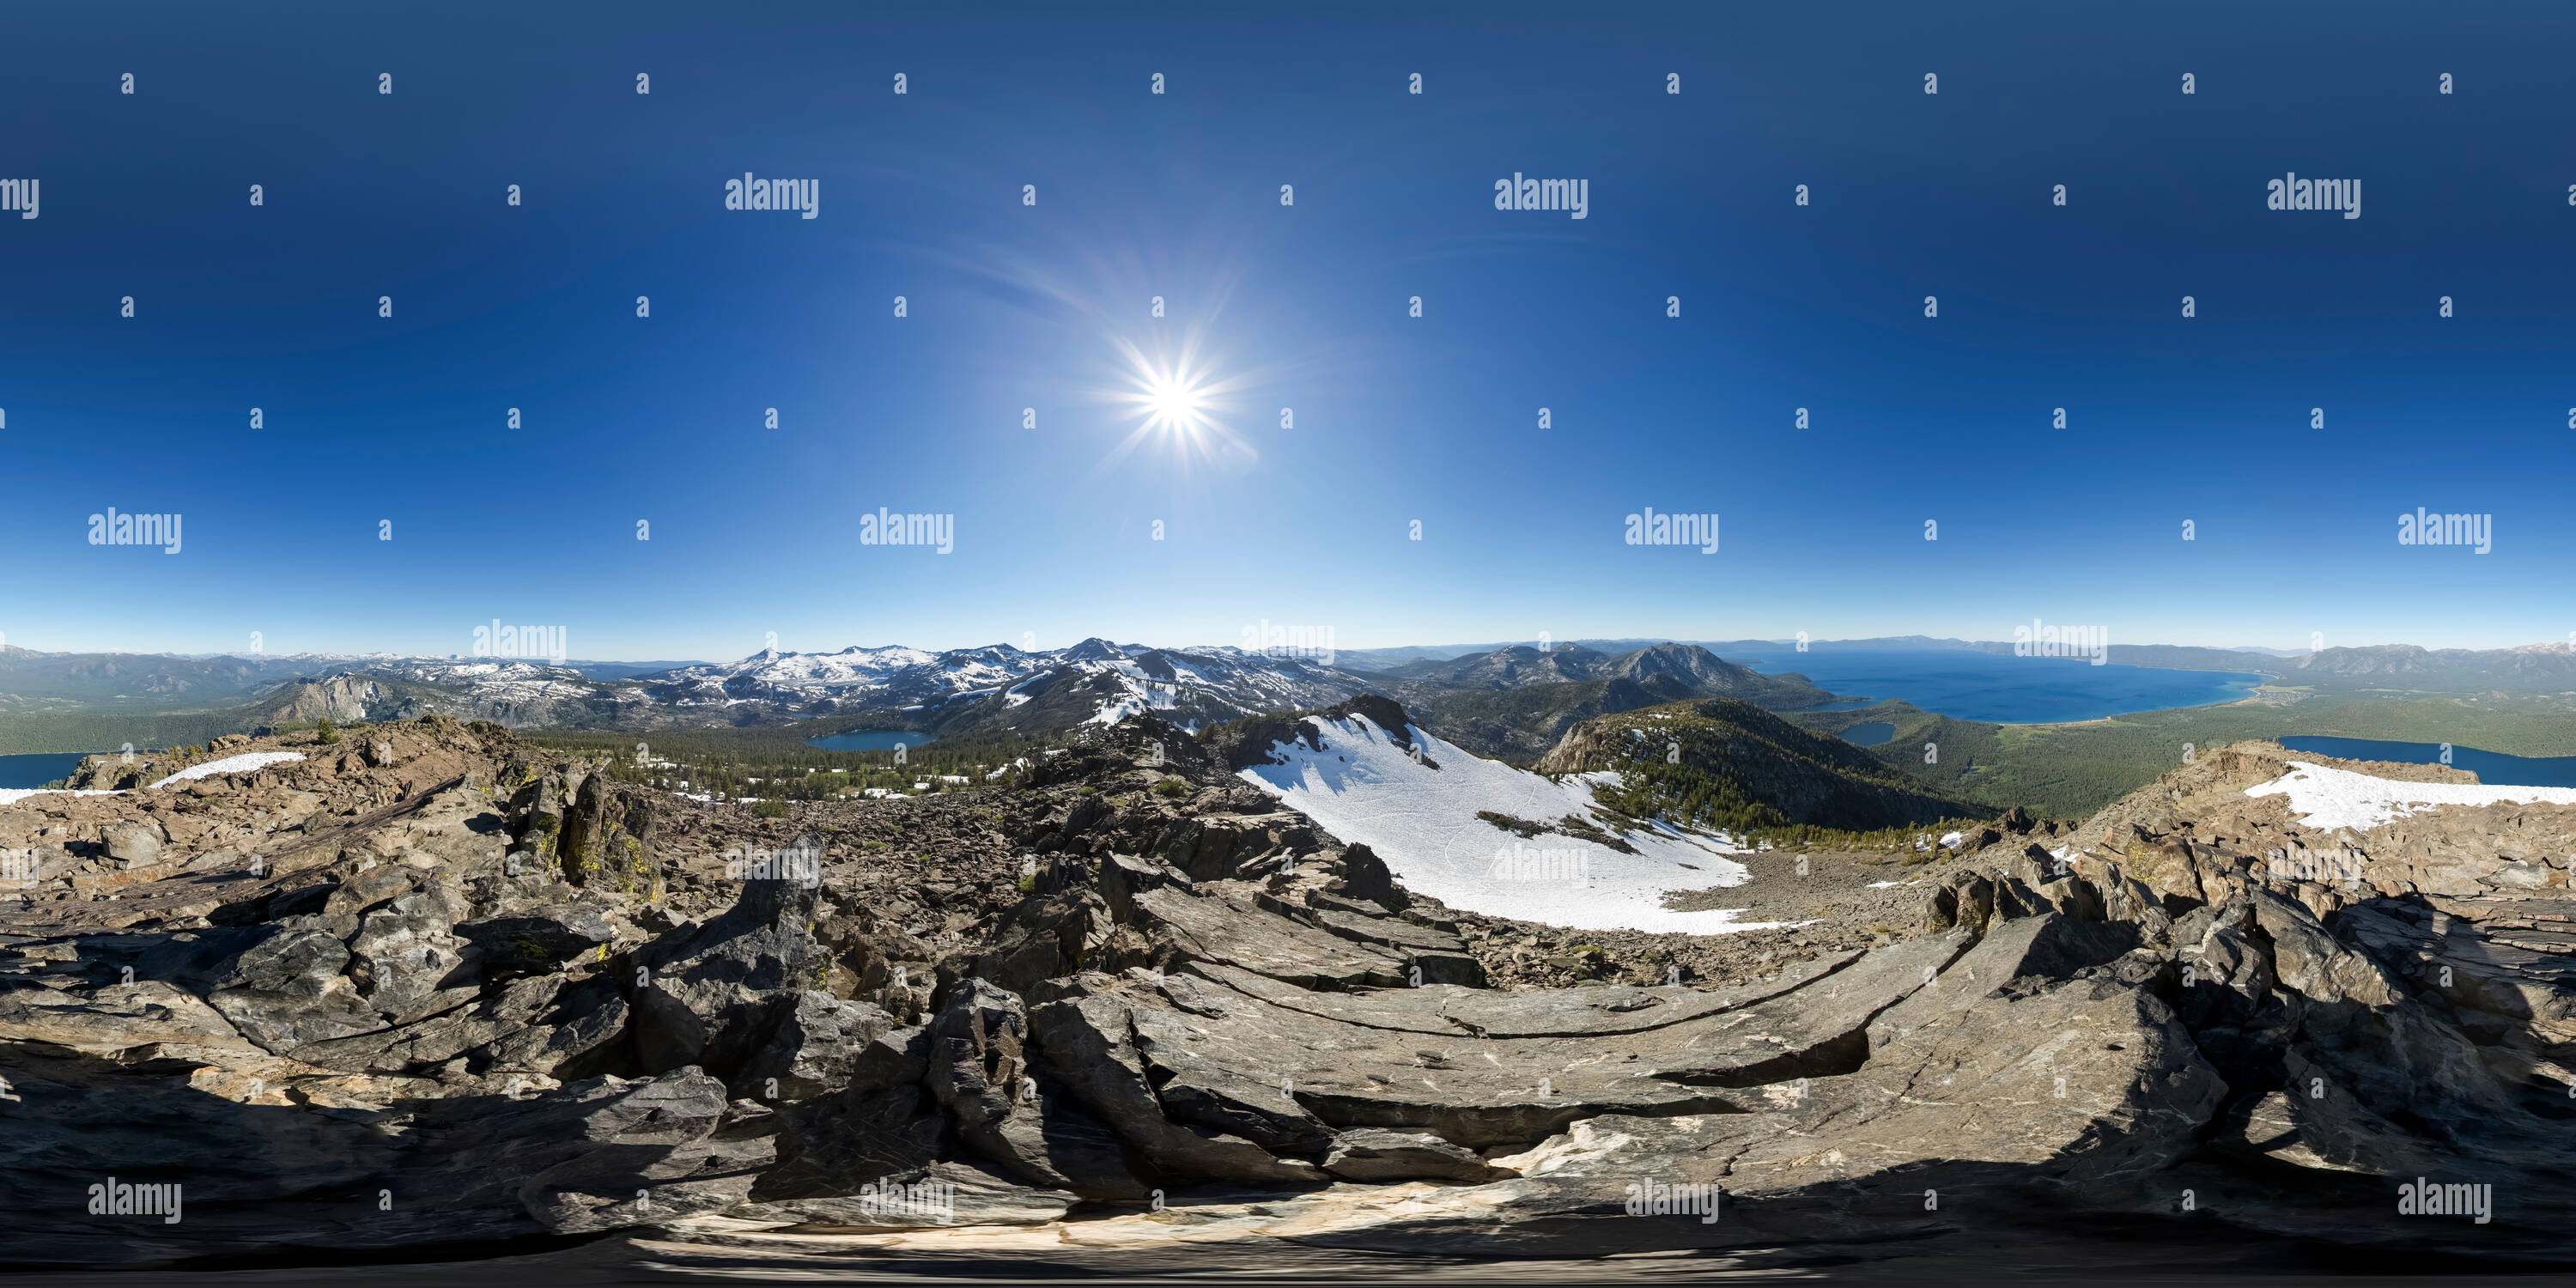 360 degree panoramic view of A 360 view in the summer from the summit of Mount Tallac overlooking Lake Tahoe and Desolation Wilderness near South Lake Tahoe, California.